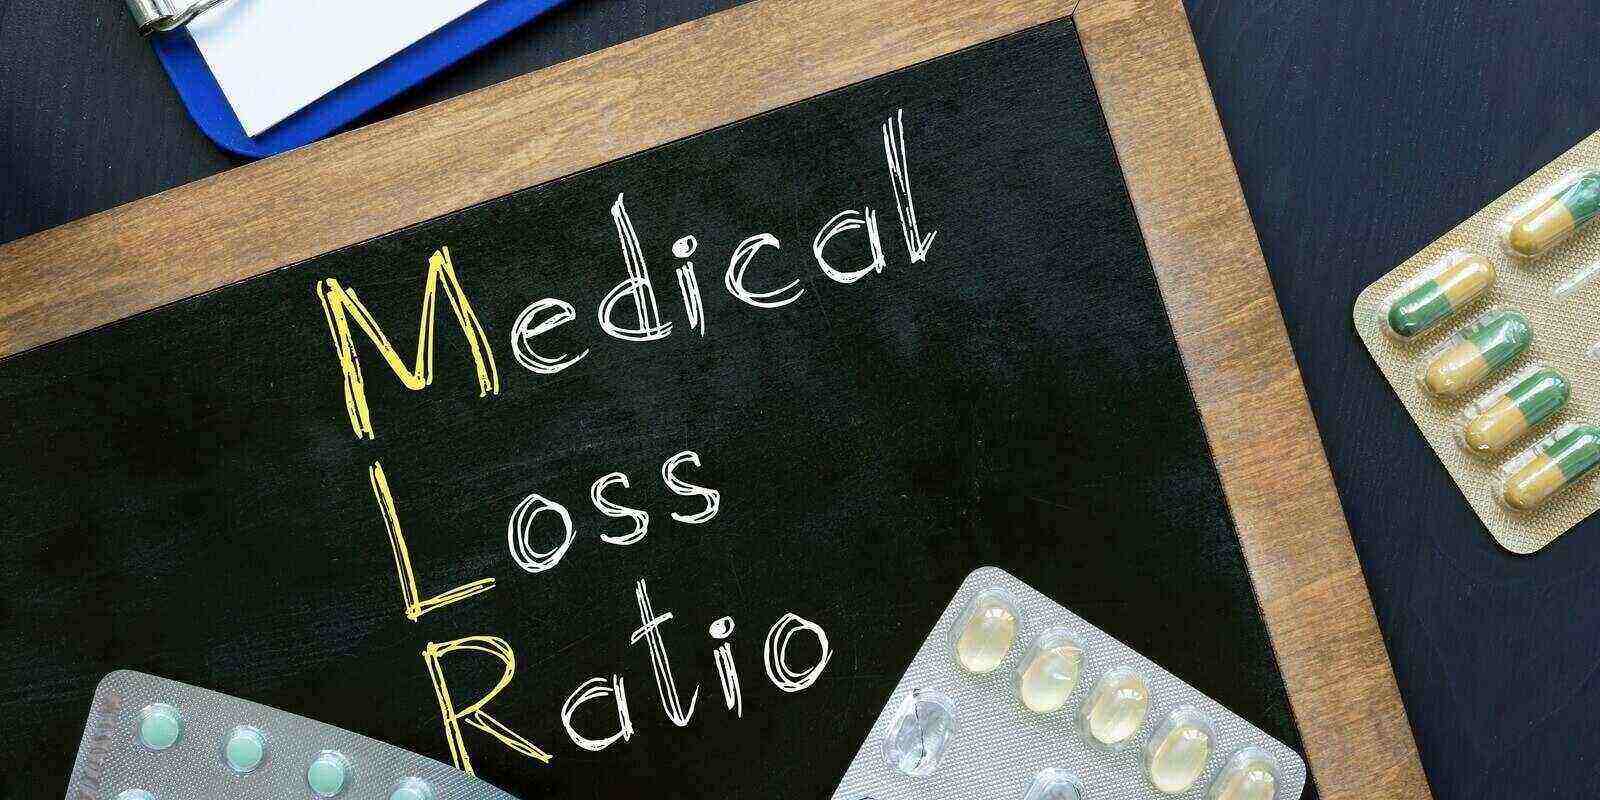 medical loss ratio mlr is shown on the conceptual business photo